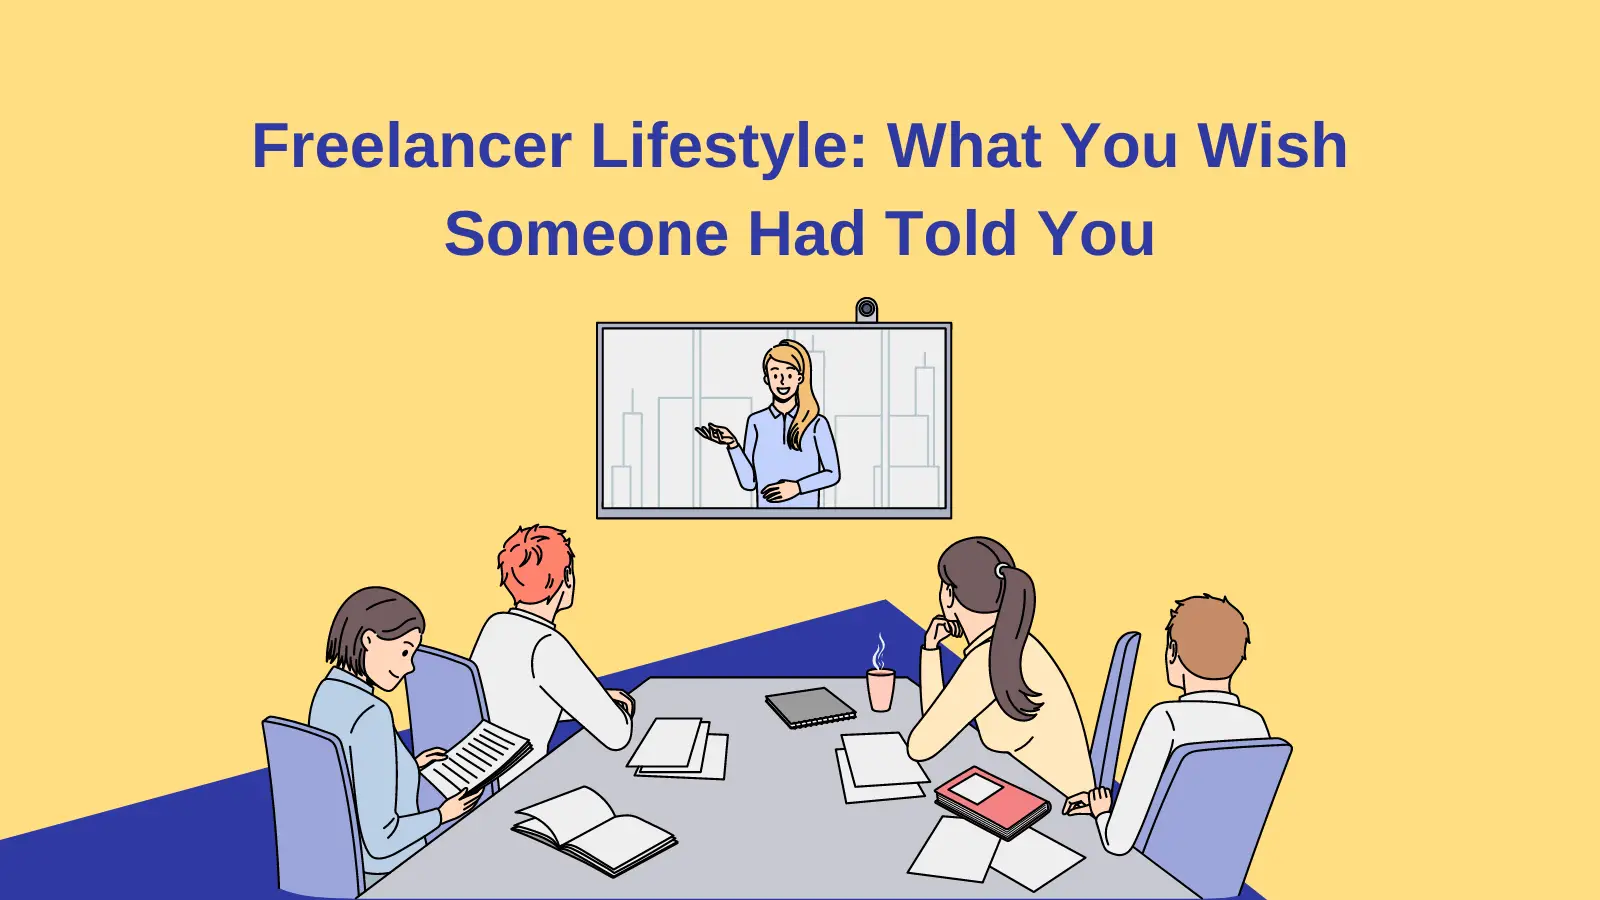 Freelancer Lifestyle: What You Wish Someone Had Told You